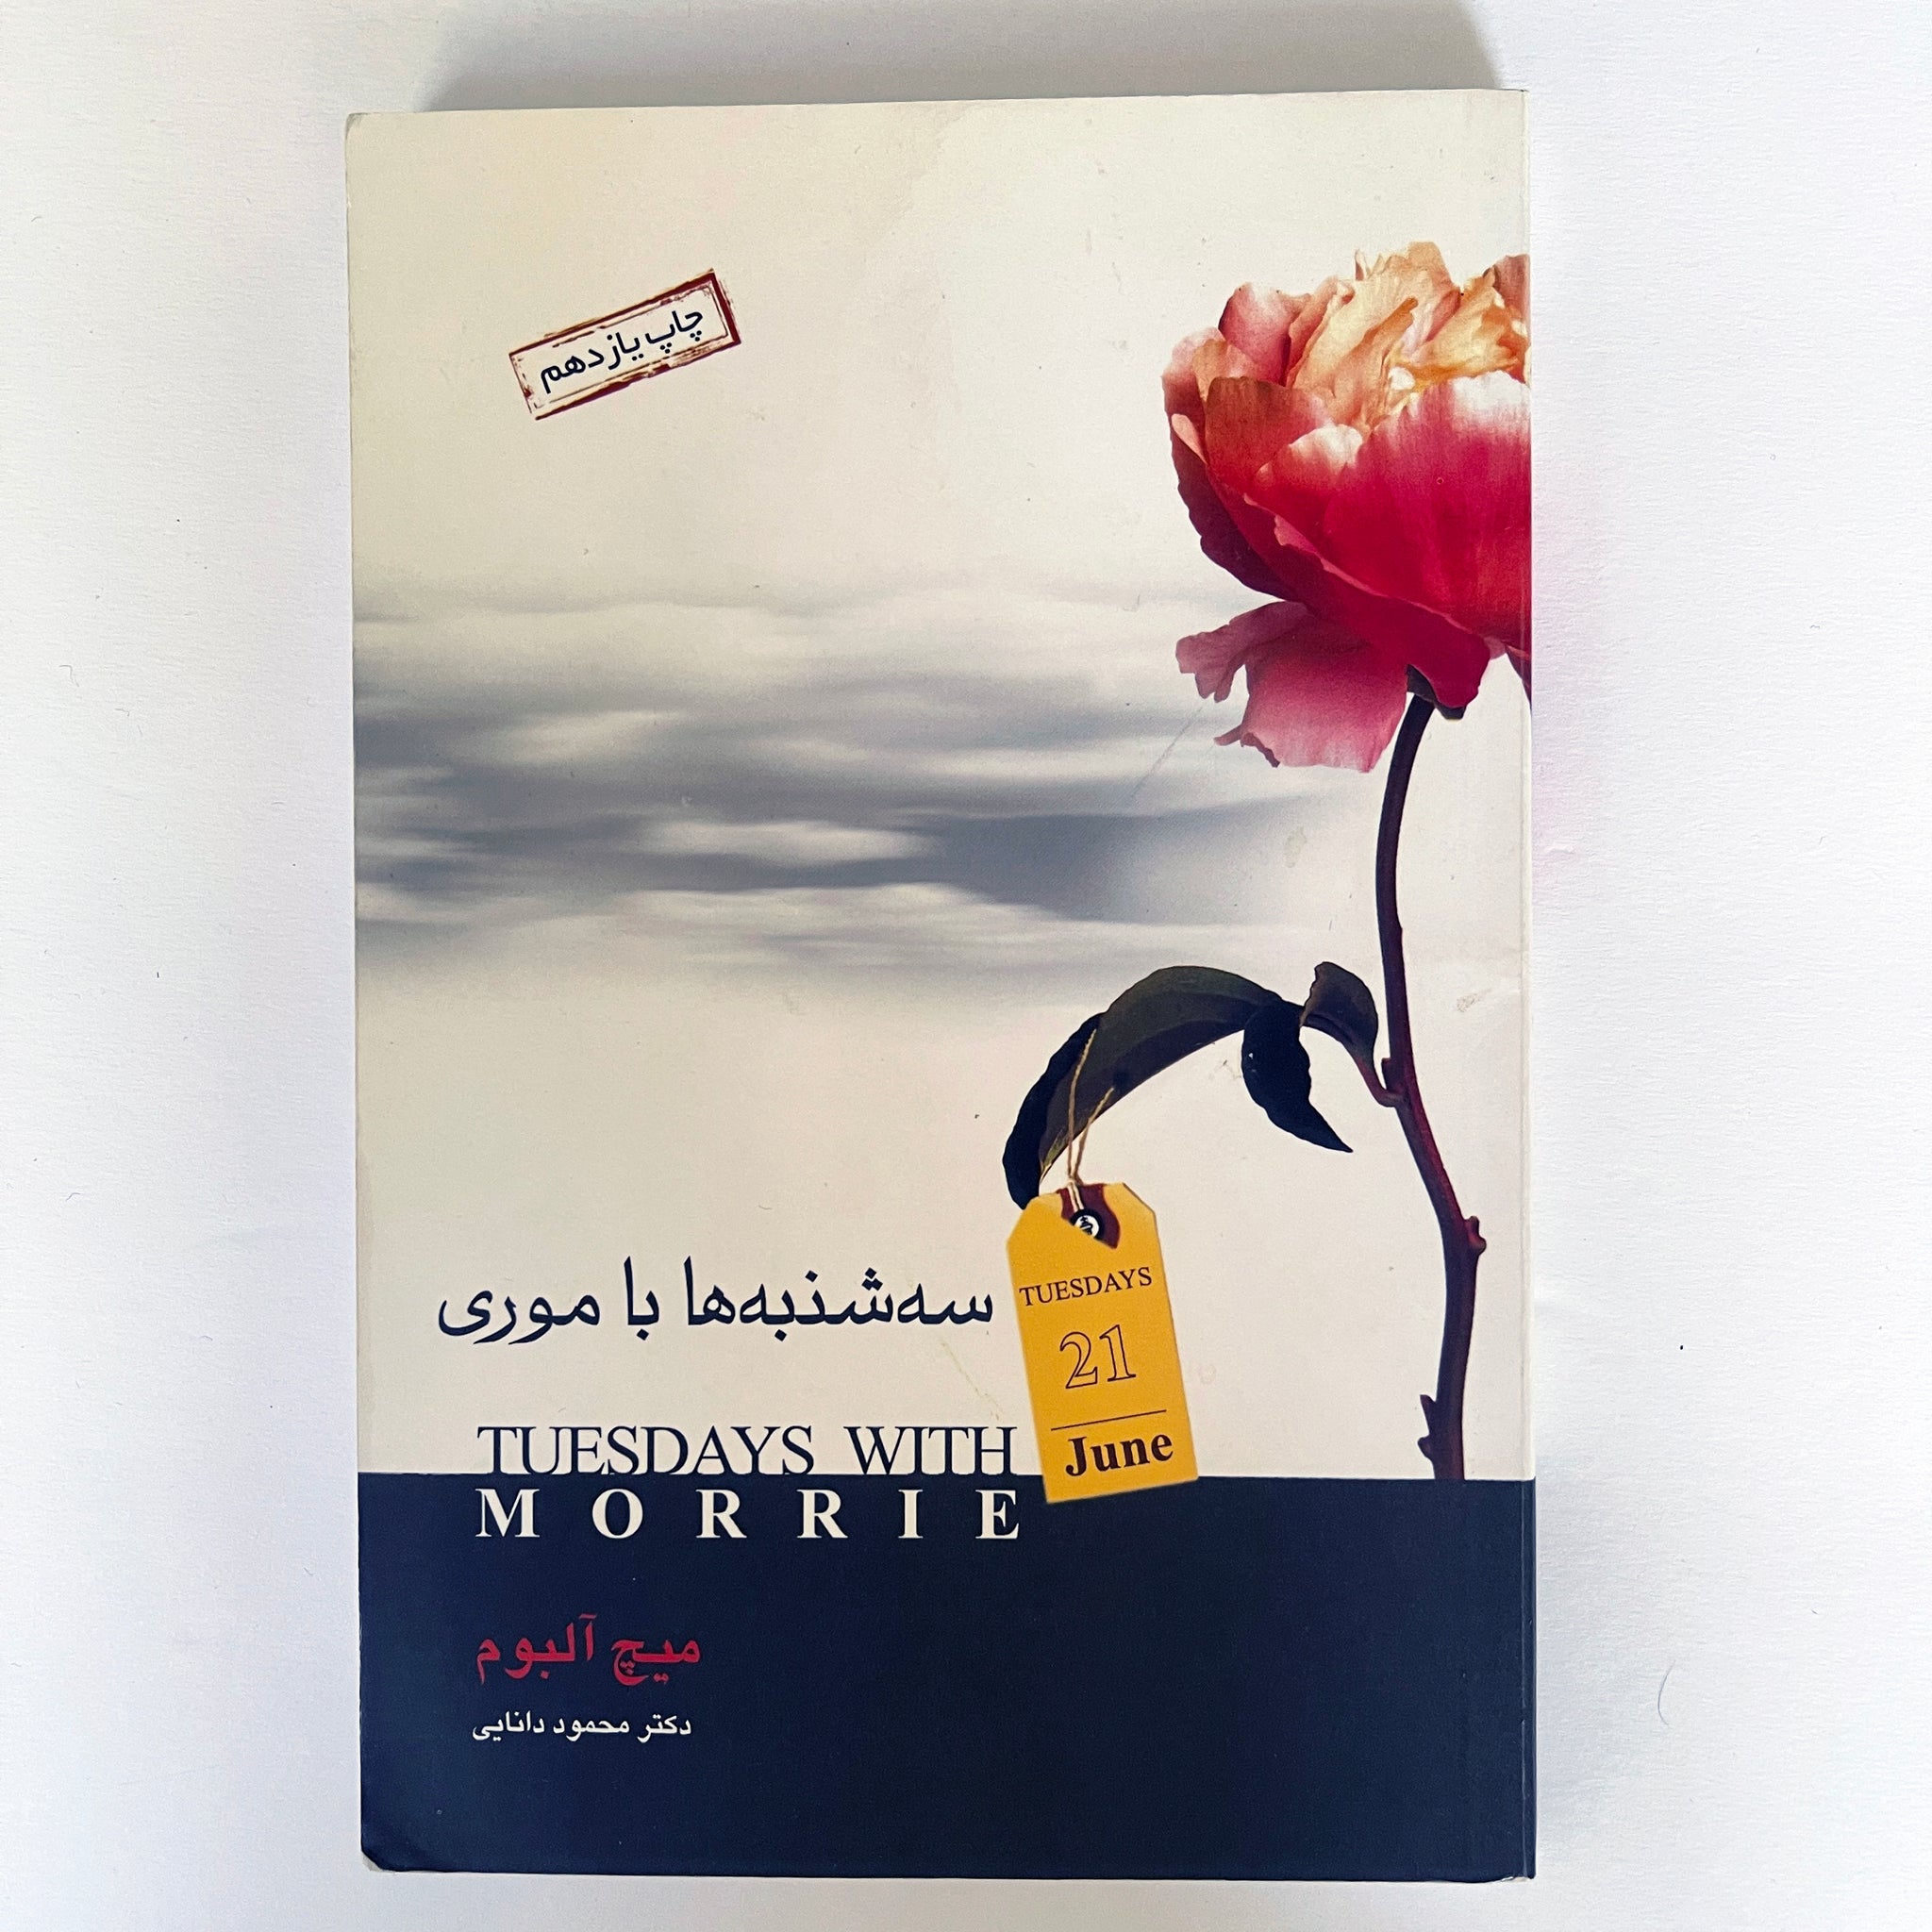 Tuesdays With Morrie, An Old Man by Mitch Albom - Farsi Language